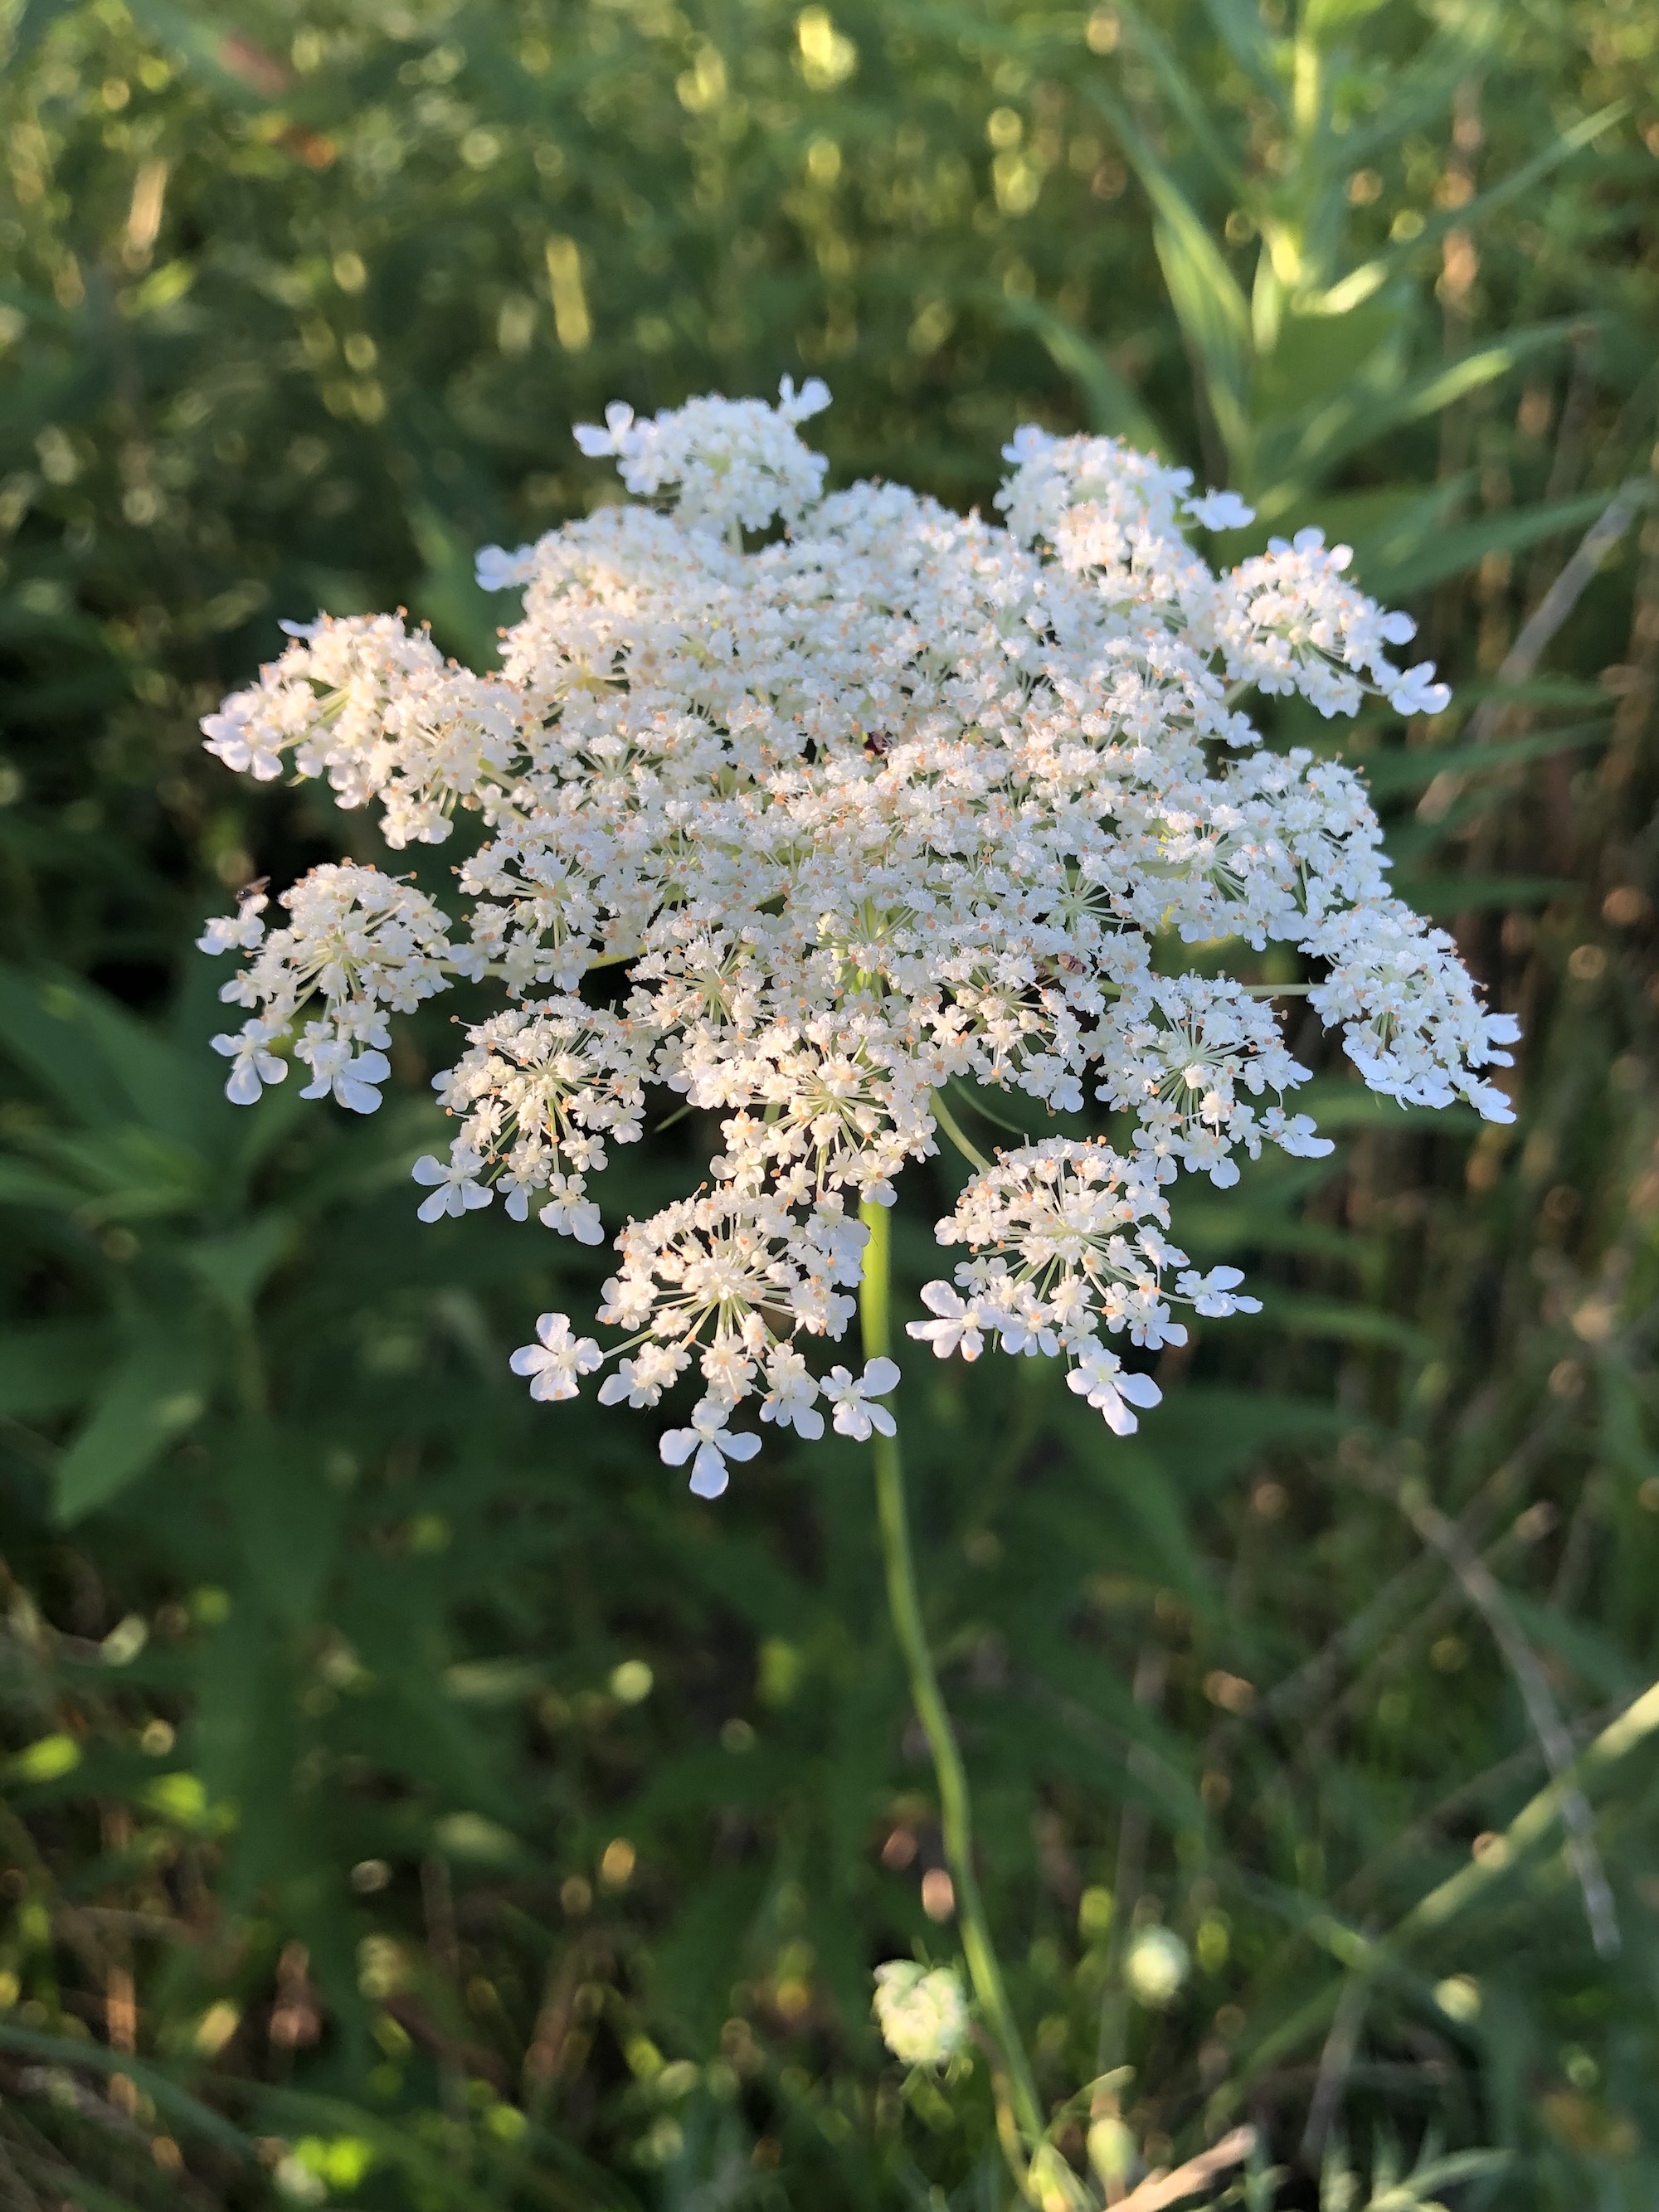 Queen Anne's Lace on bank of retaining pond on the corner of Nakoma Road and Manitou Way on August 6, 2020.